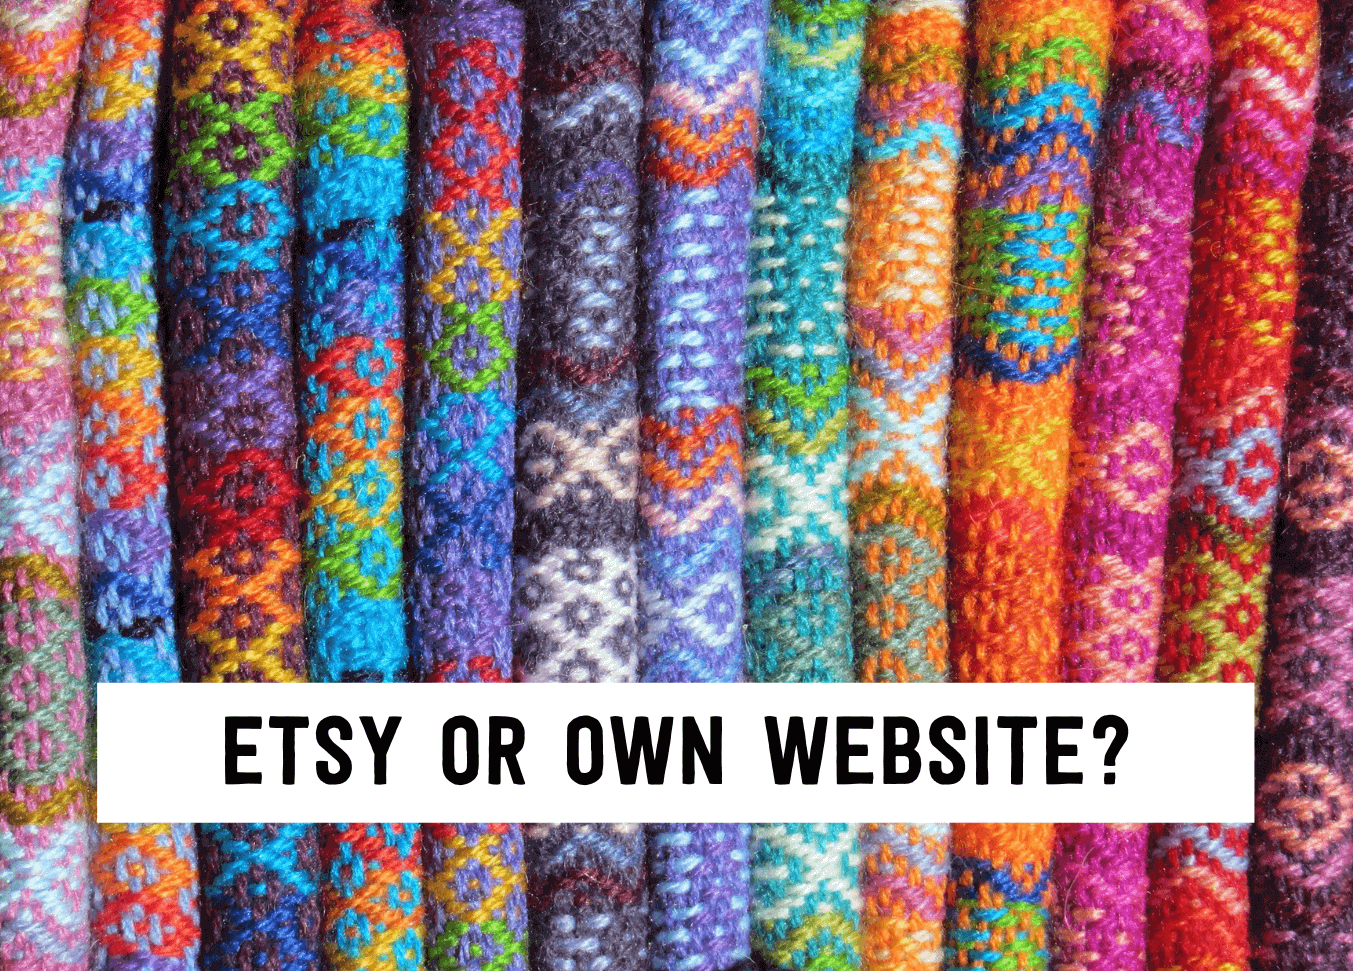 Etsy or own website? | Tizzit.co - start and grow a successful handmade business